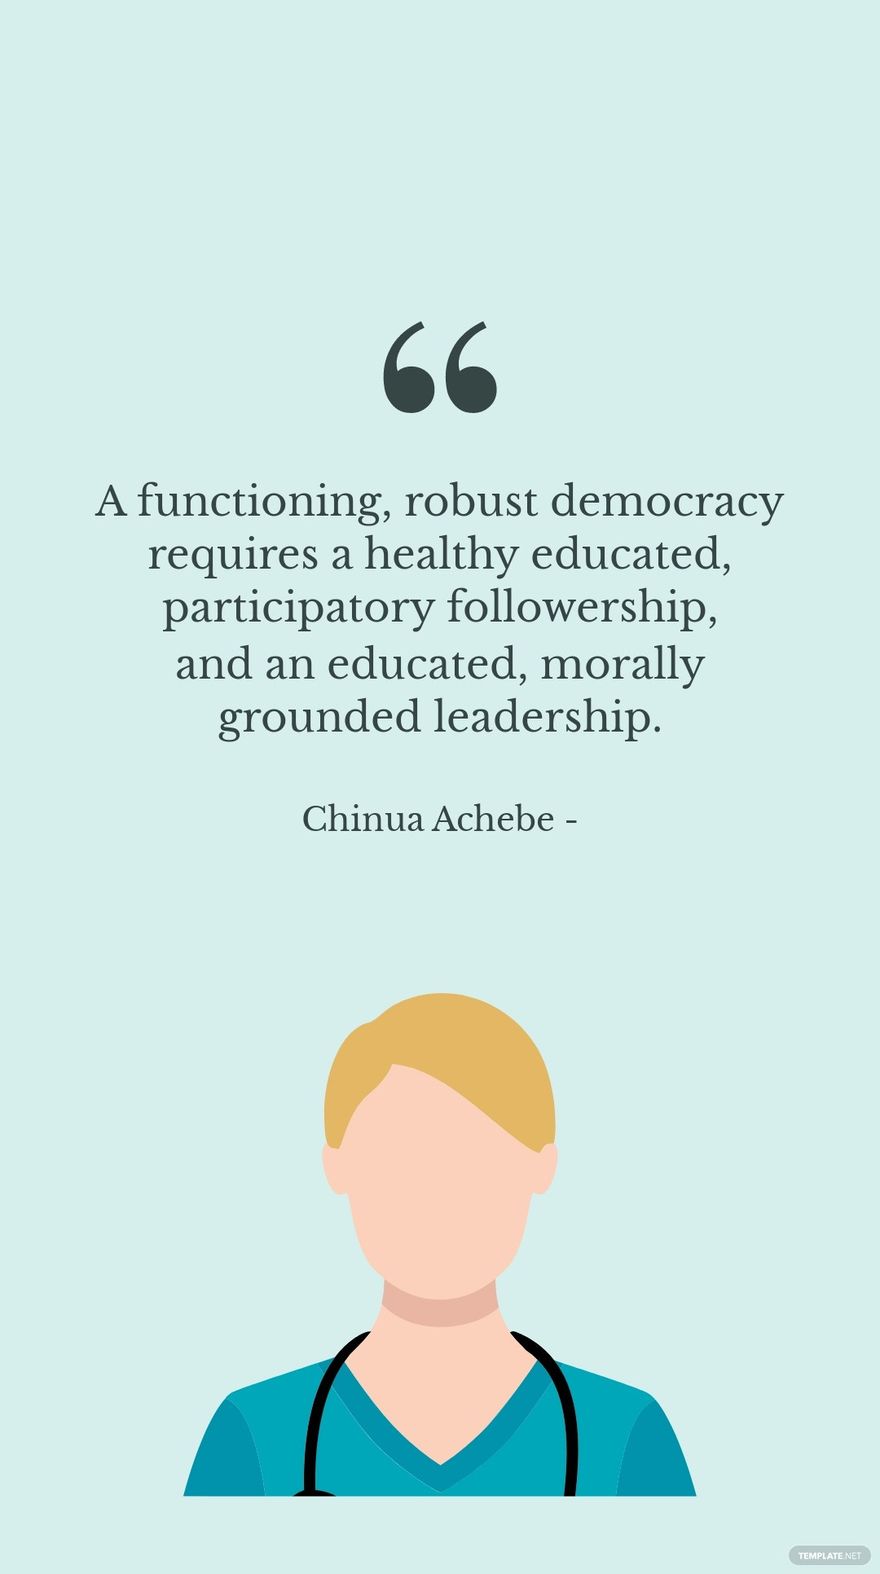 Chinua Achebe - A functioning, robust democracy requires a healthy educated, participatory followership, and an educated, morally grounded leadership.